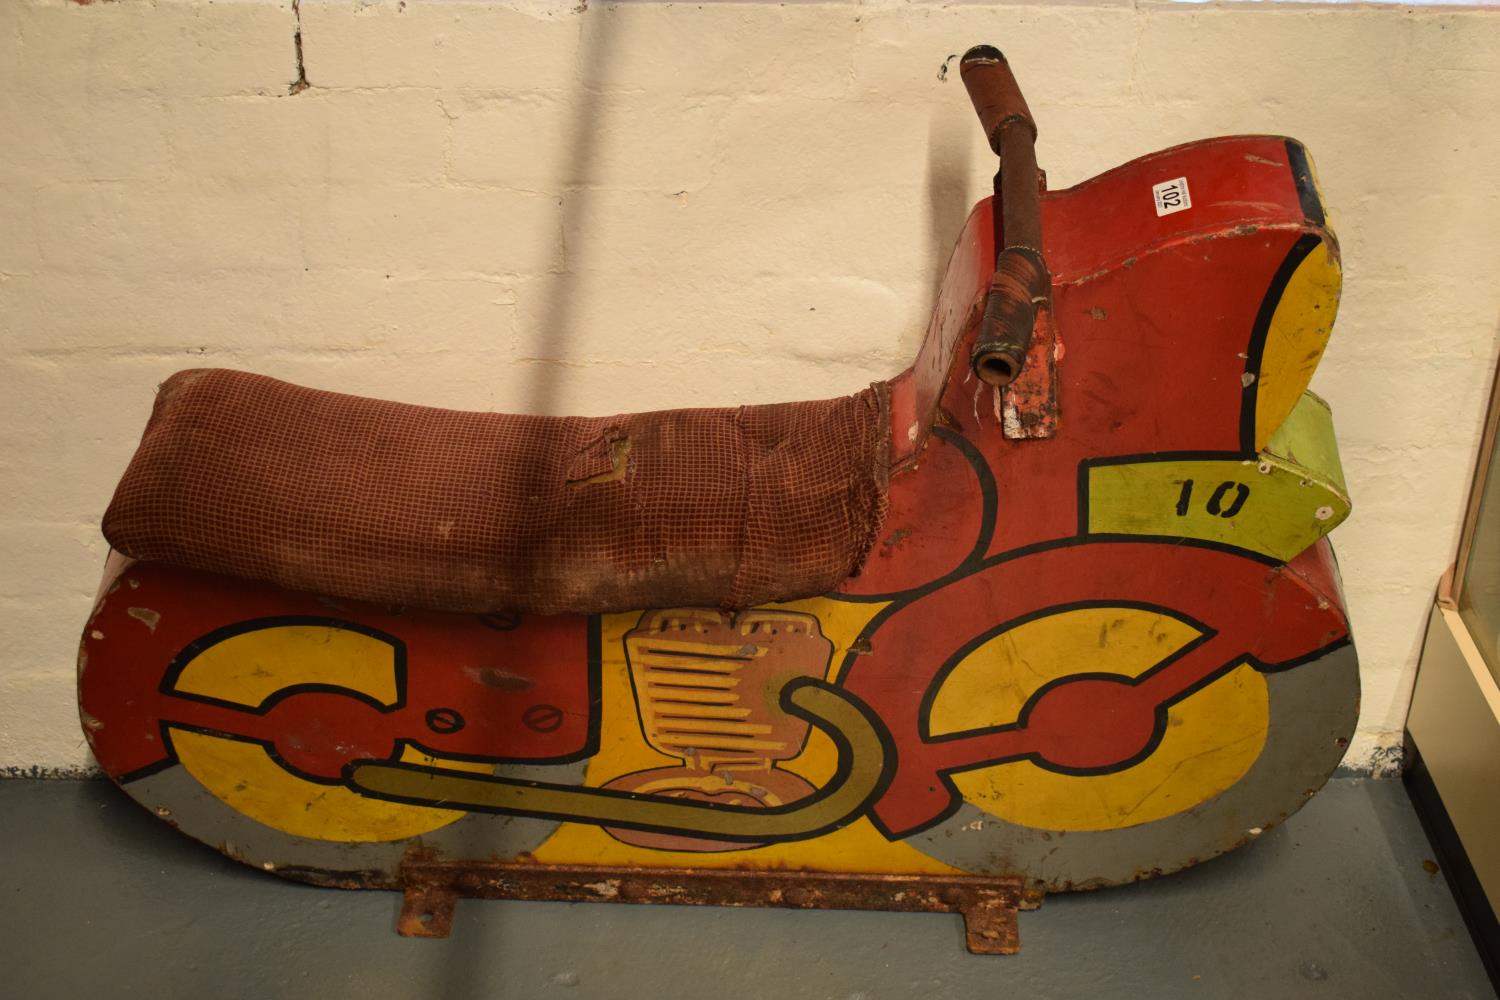 1950s speedway bike from a fairground ride - Image 6 of 8